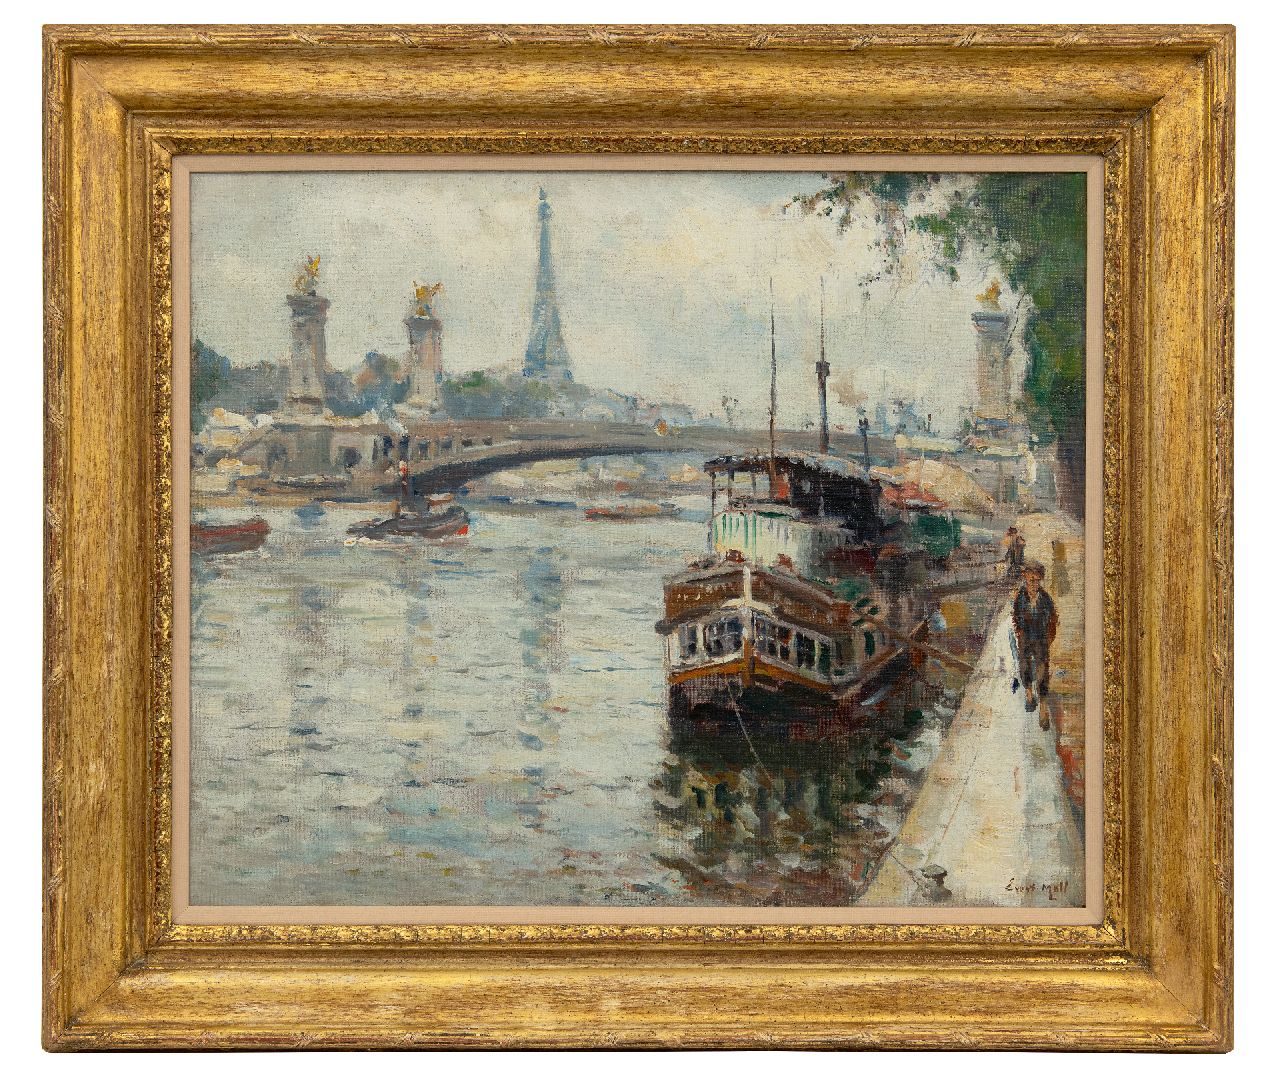 Moll E.  | Evert Moll | Paintings offered for sale | The Seine and the Pont Alexandre III in Paris, oil on canvas 50.4 x 60.6 cm, signed l.r and painted ca. 1925